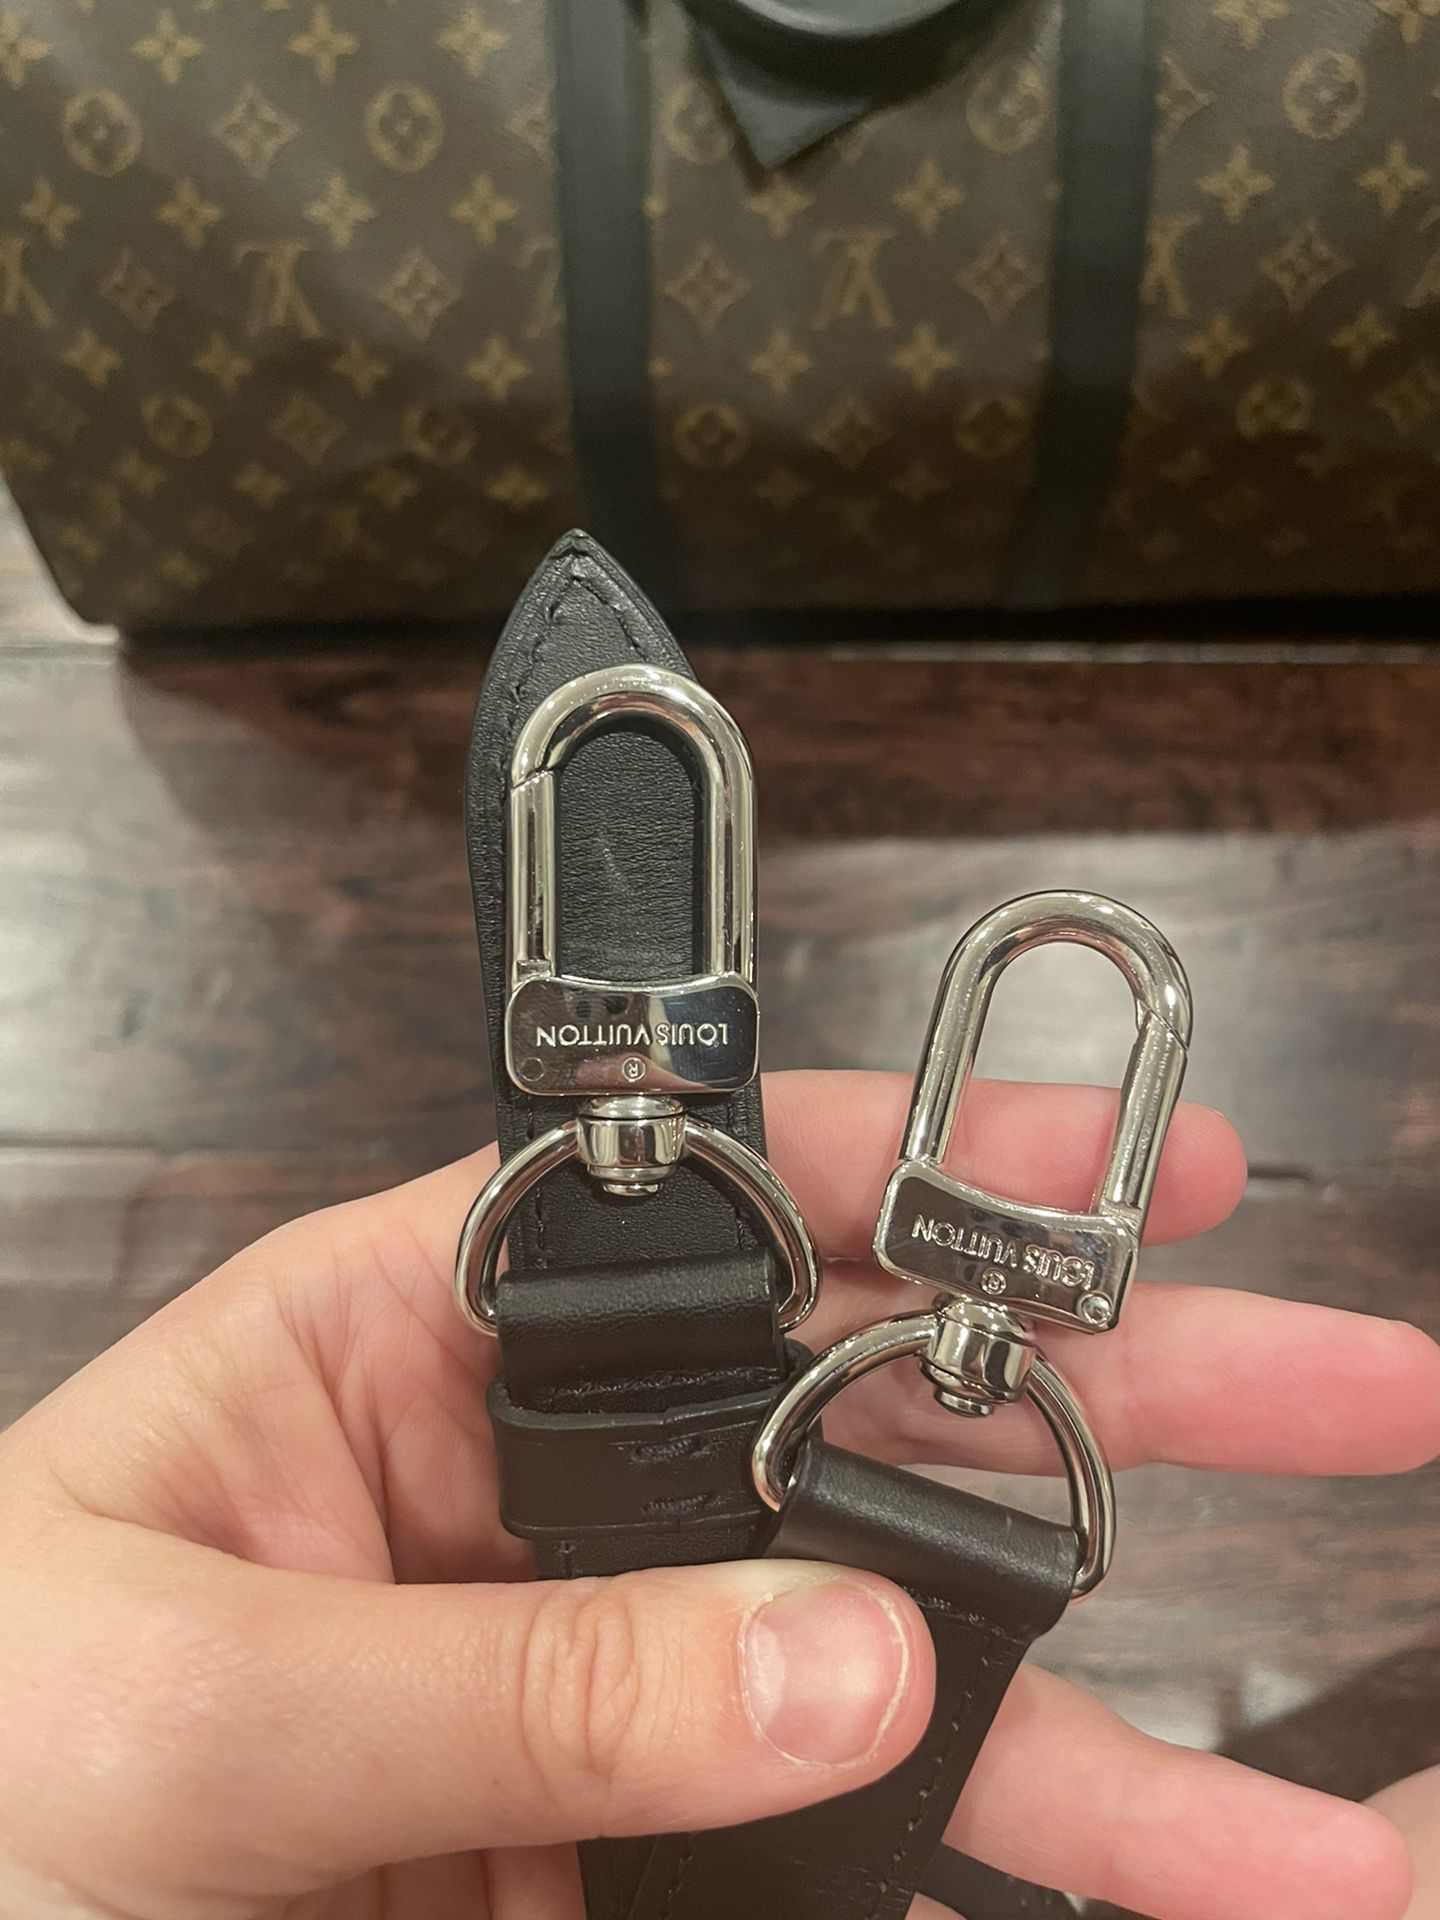 Keepall Bandouliere 50 LV for Sale in Moreno Valley, CA - OfferUp